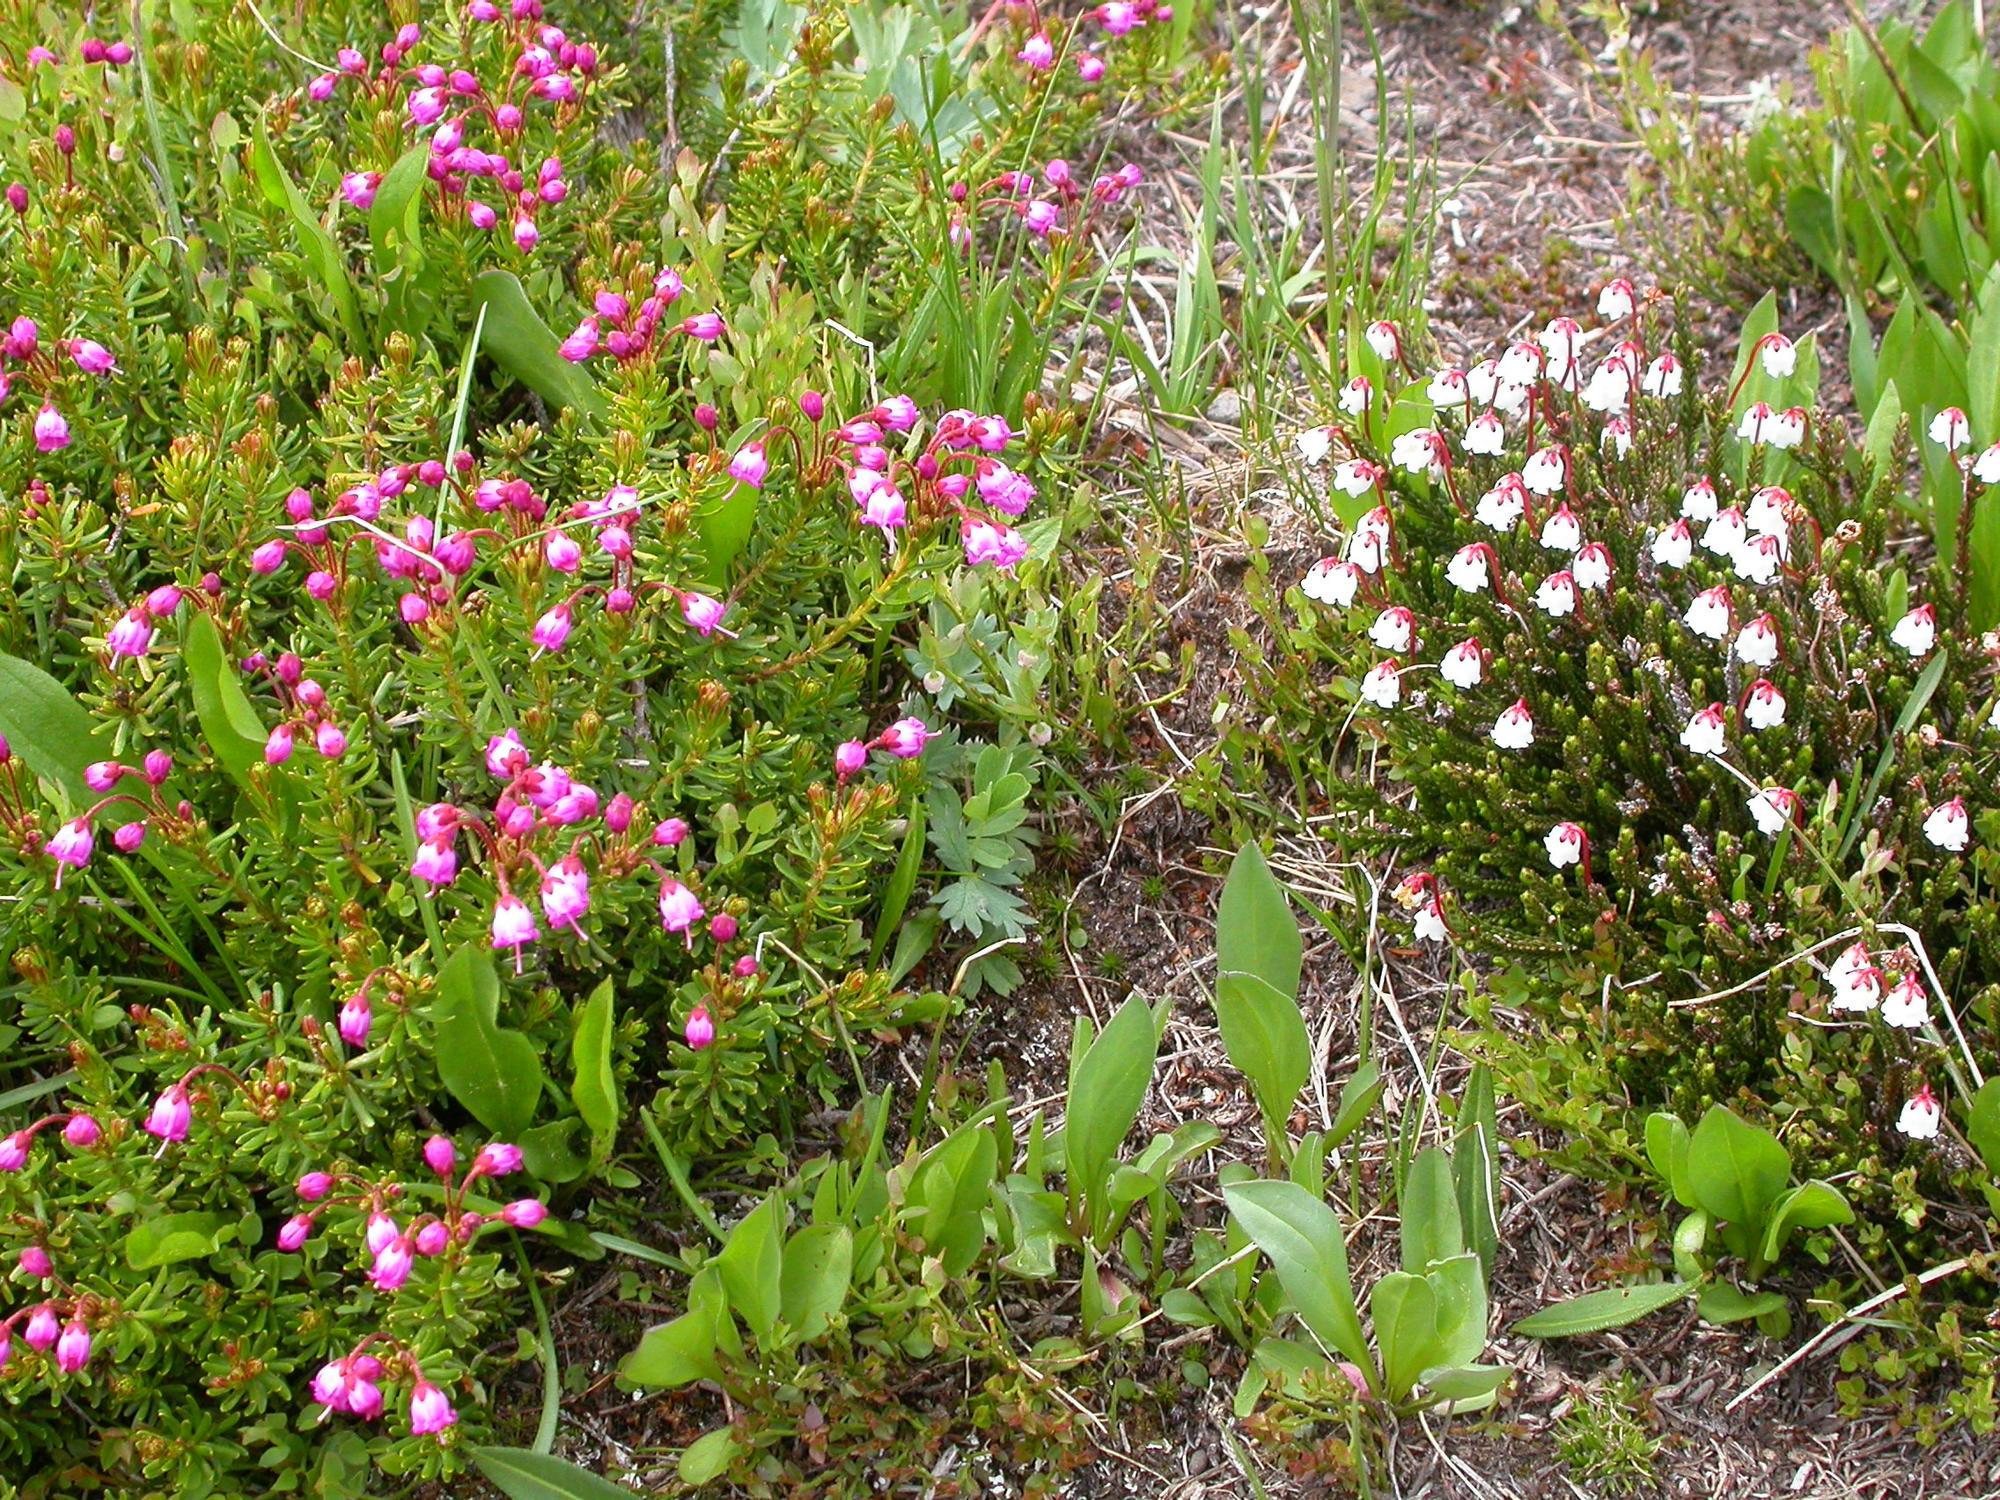 short plants with ferny foliage and small, bell-shaped pink or white flowers